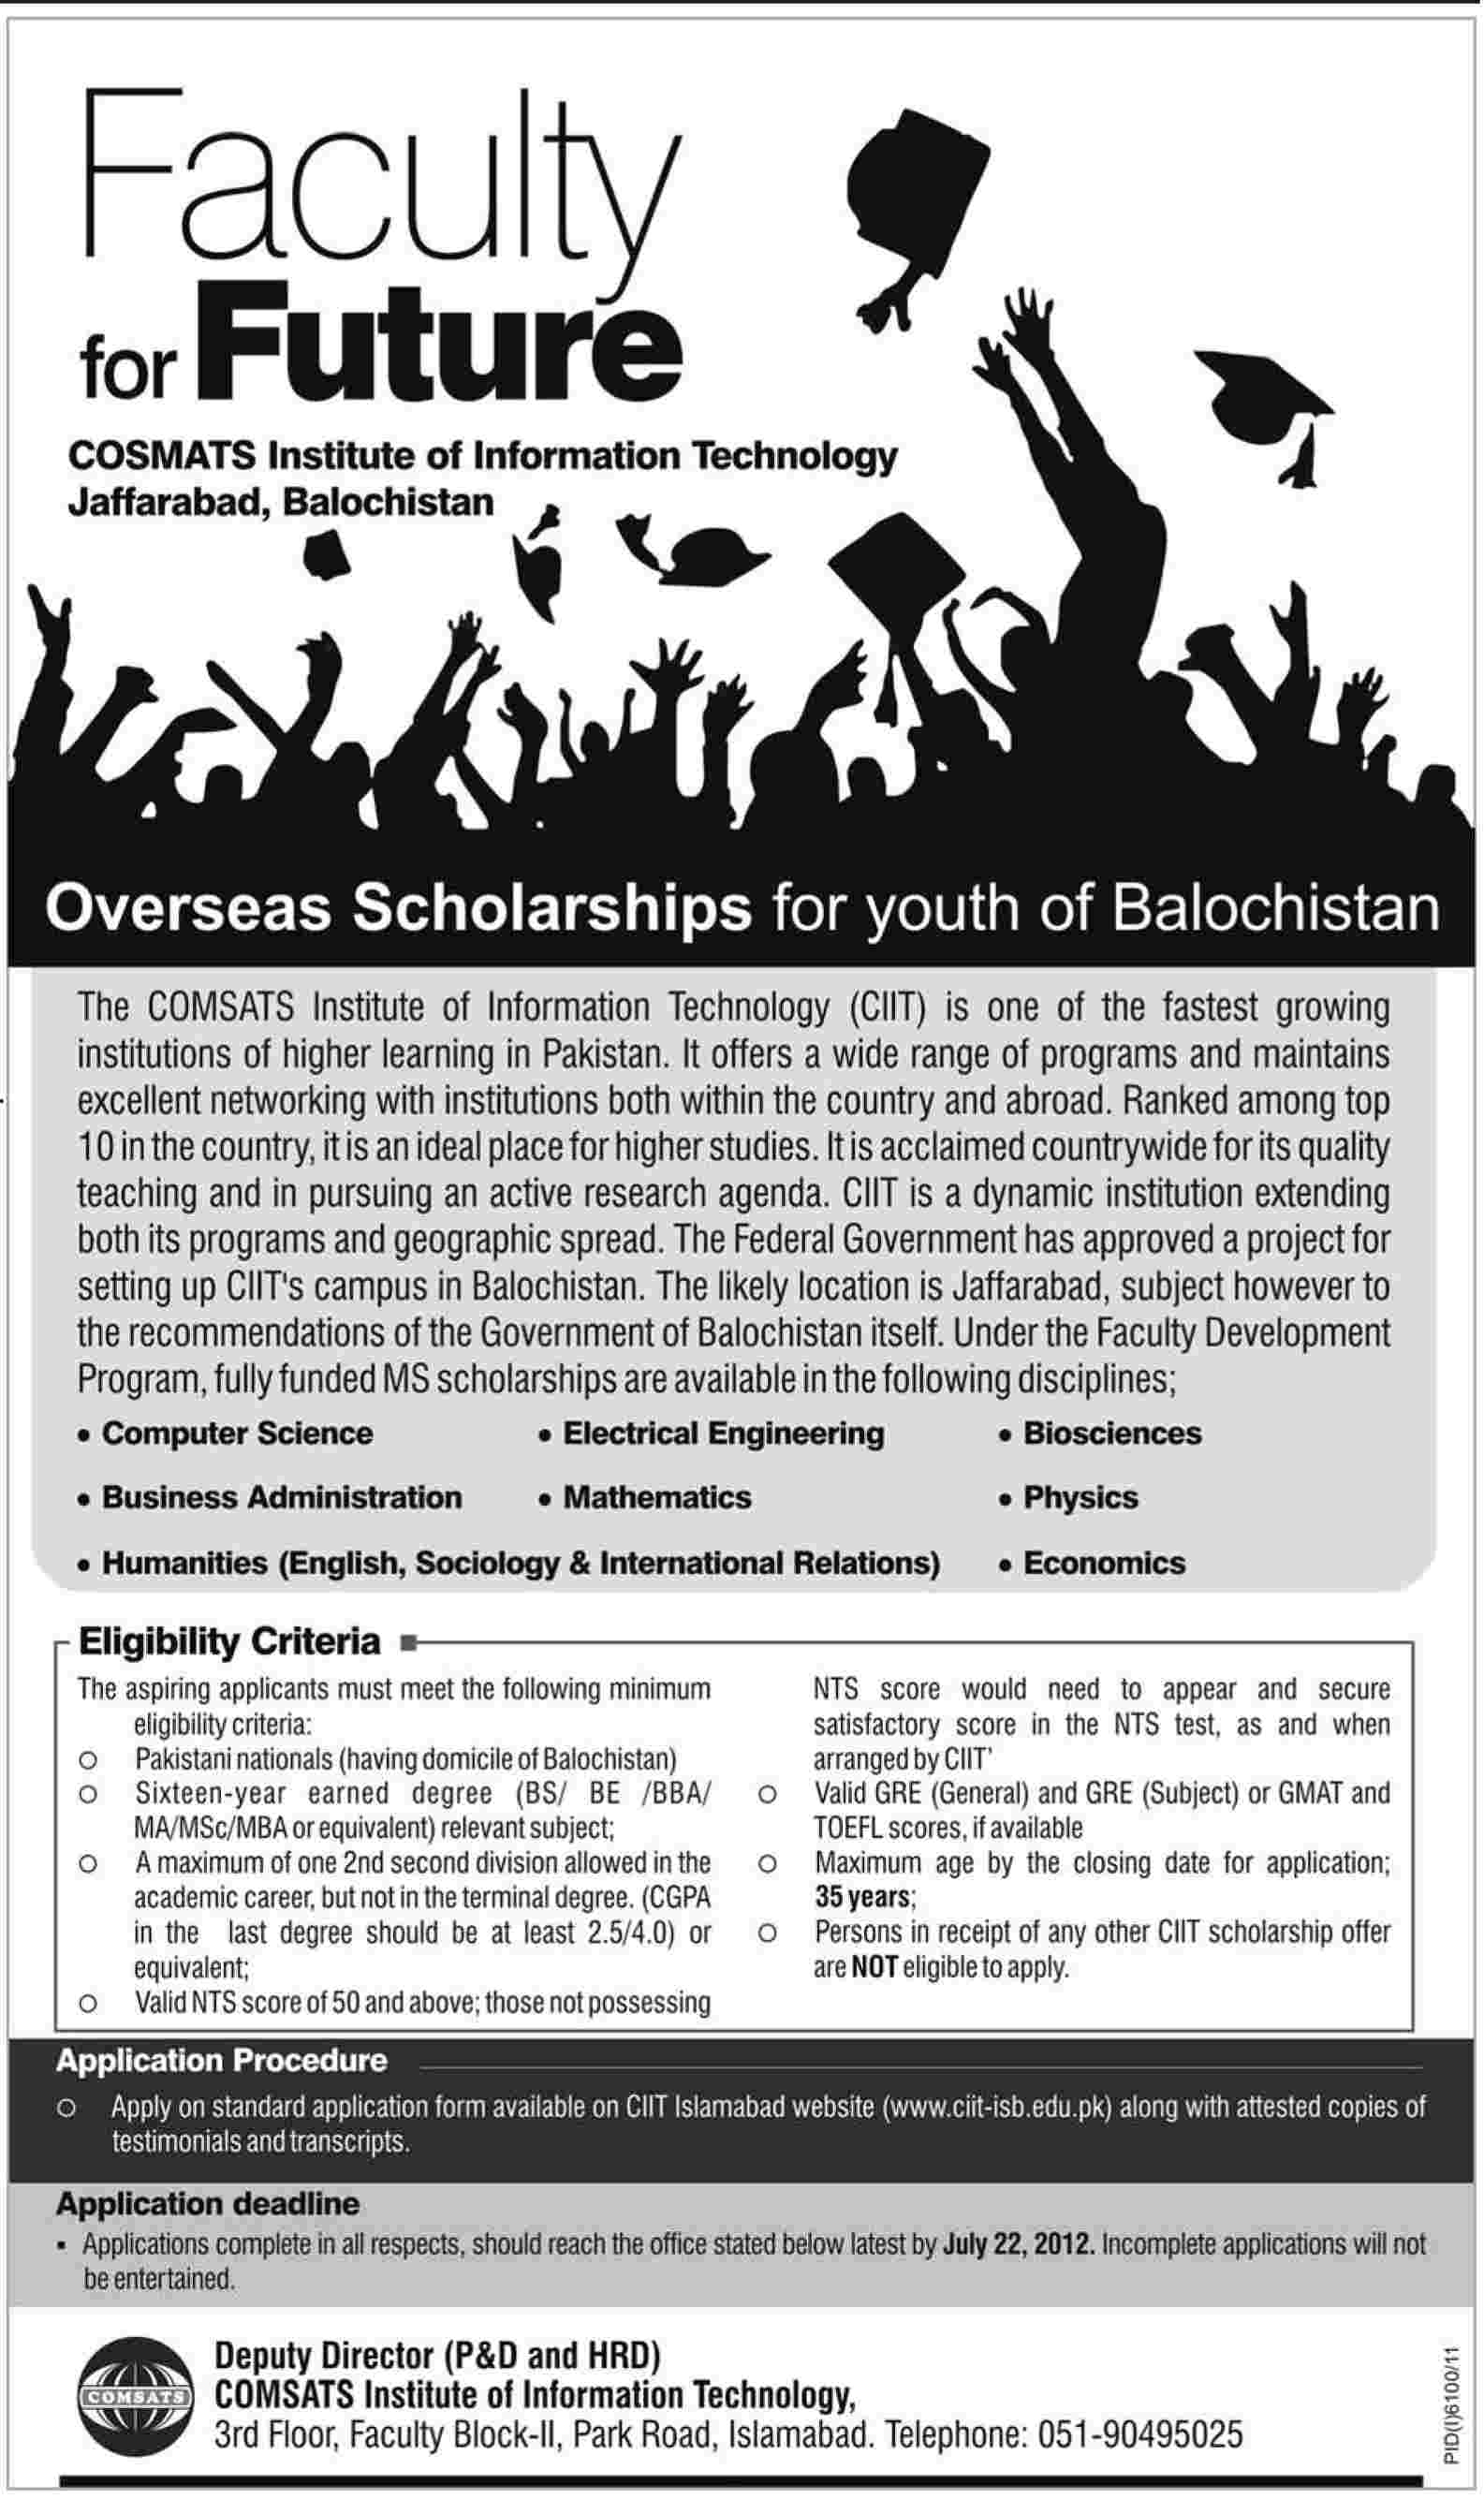 MS Scholarships Offered by COMSATS Institute of Information Technology (CIIT) for Youth of Balochistan